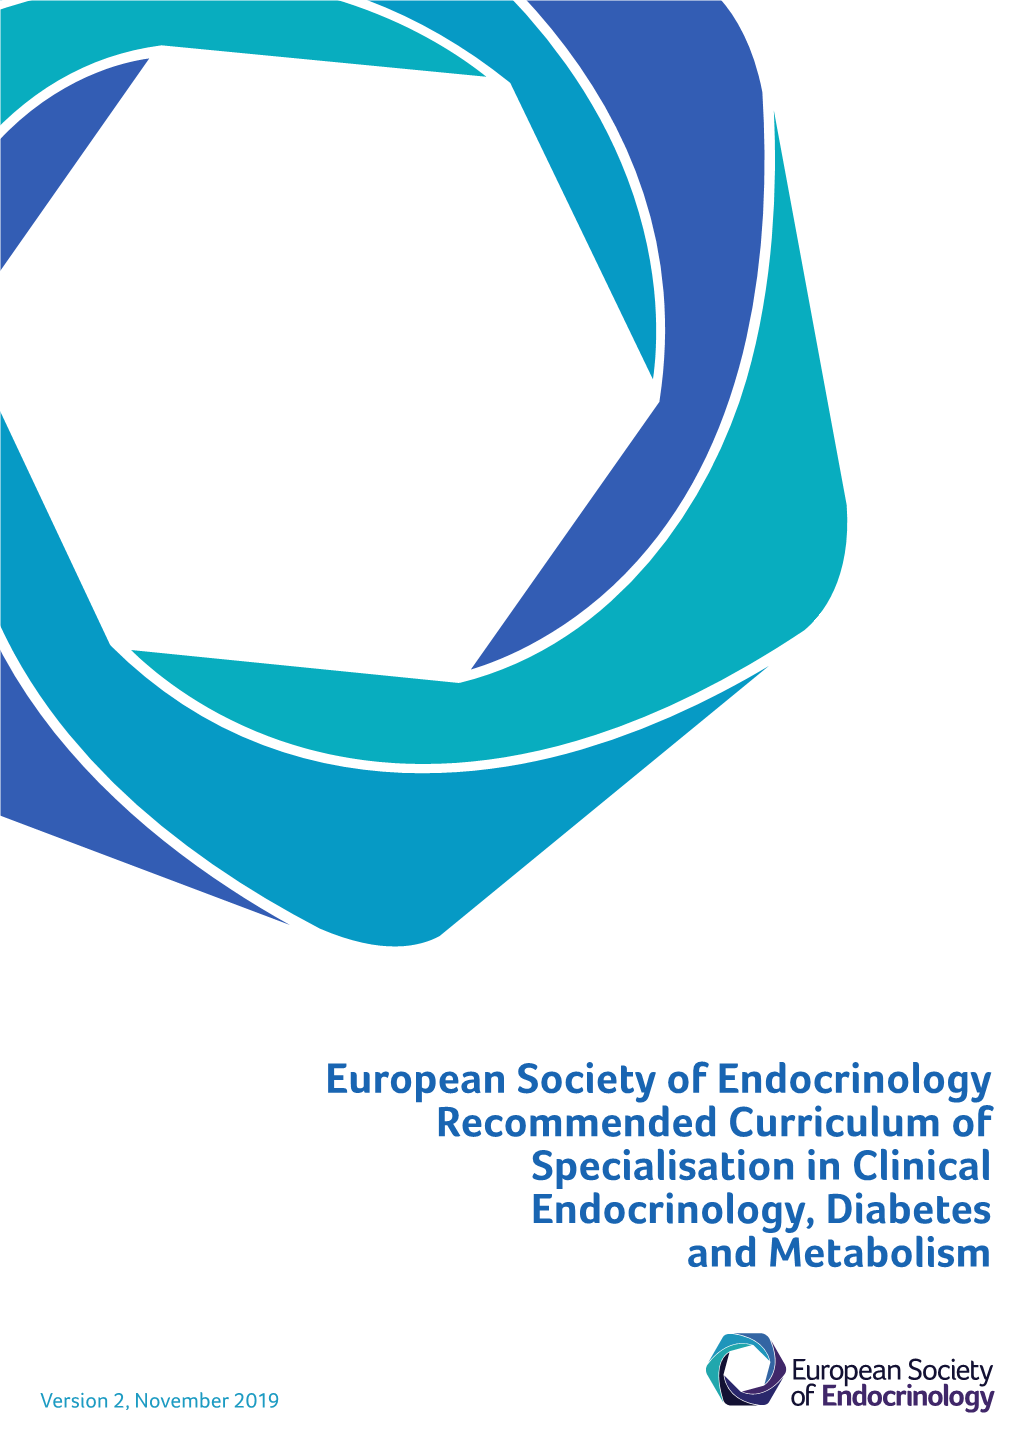 To View the ESE Recommended Curriculum of Specialisation in Clinical Endocrinology, Diabetes and Metabolism